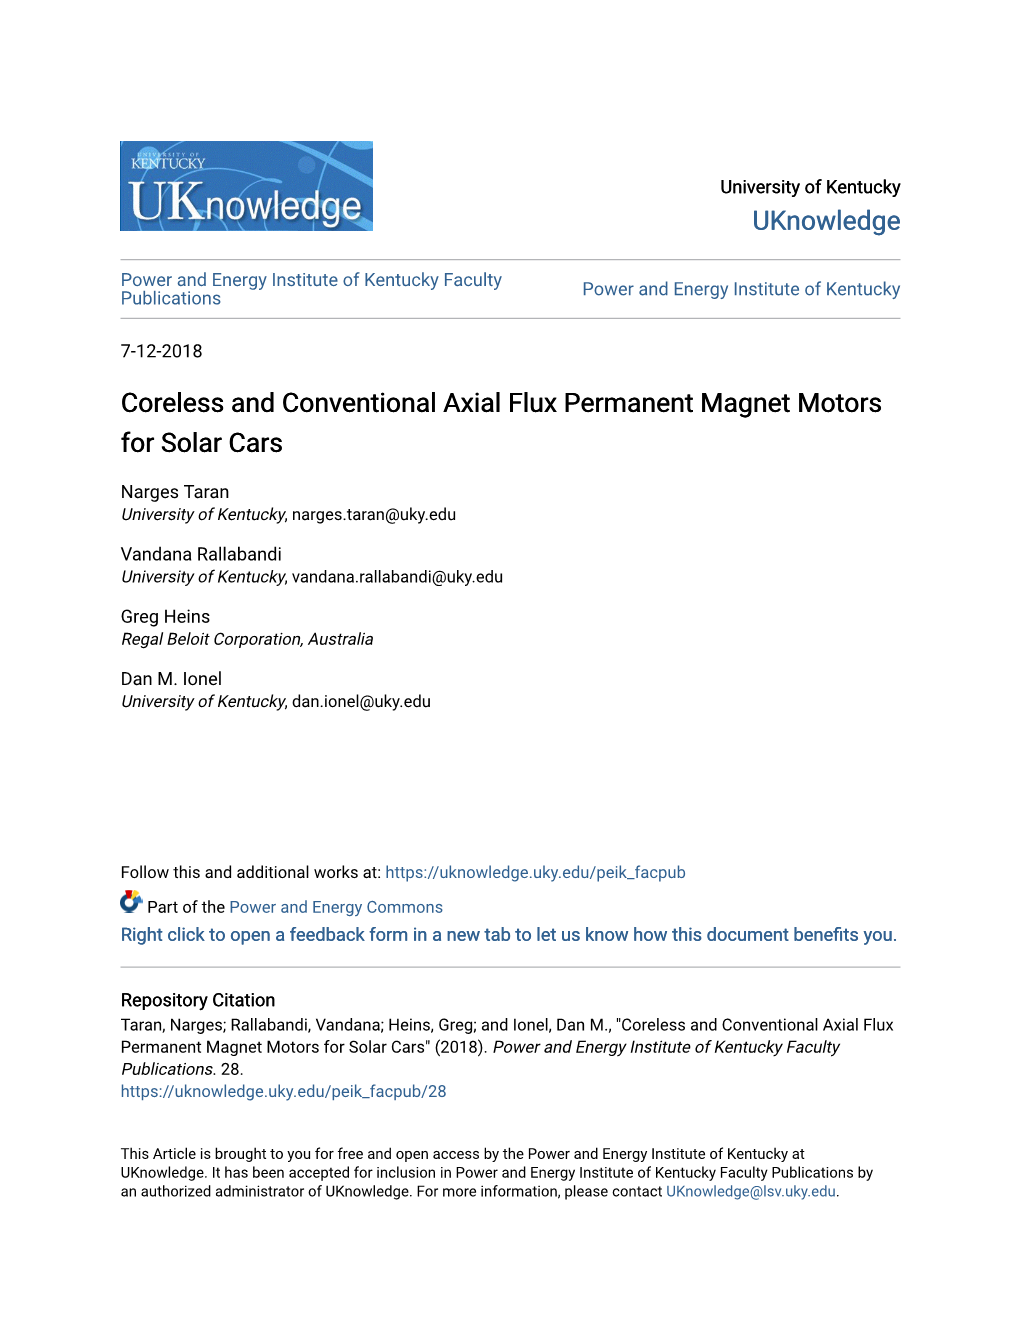 Coreless and Conventional Axial Flux Permanent Magnet Motors for Solar Cars